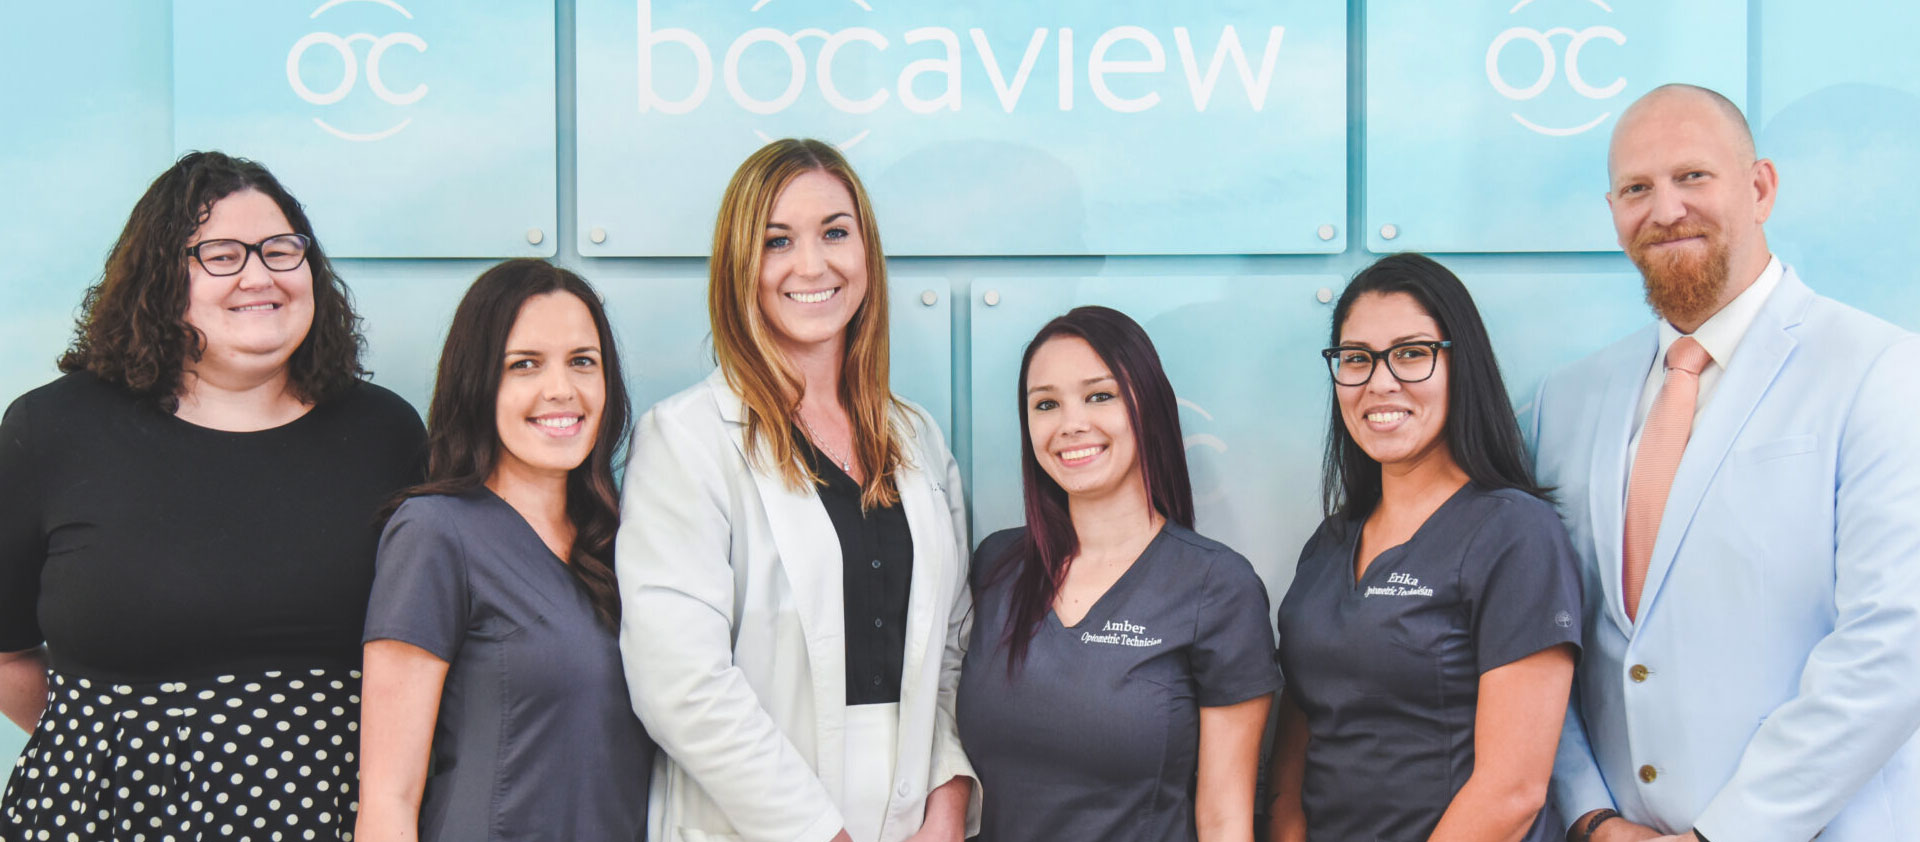 Our Team of Eye Care Doctors at Bocaview